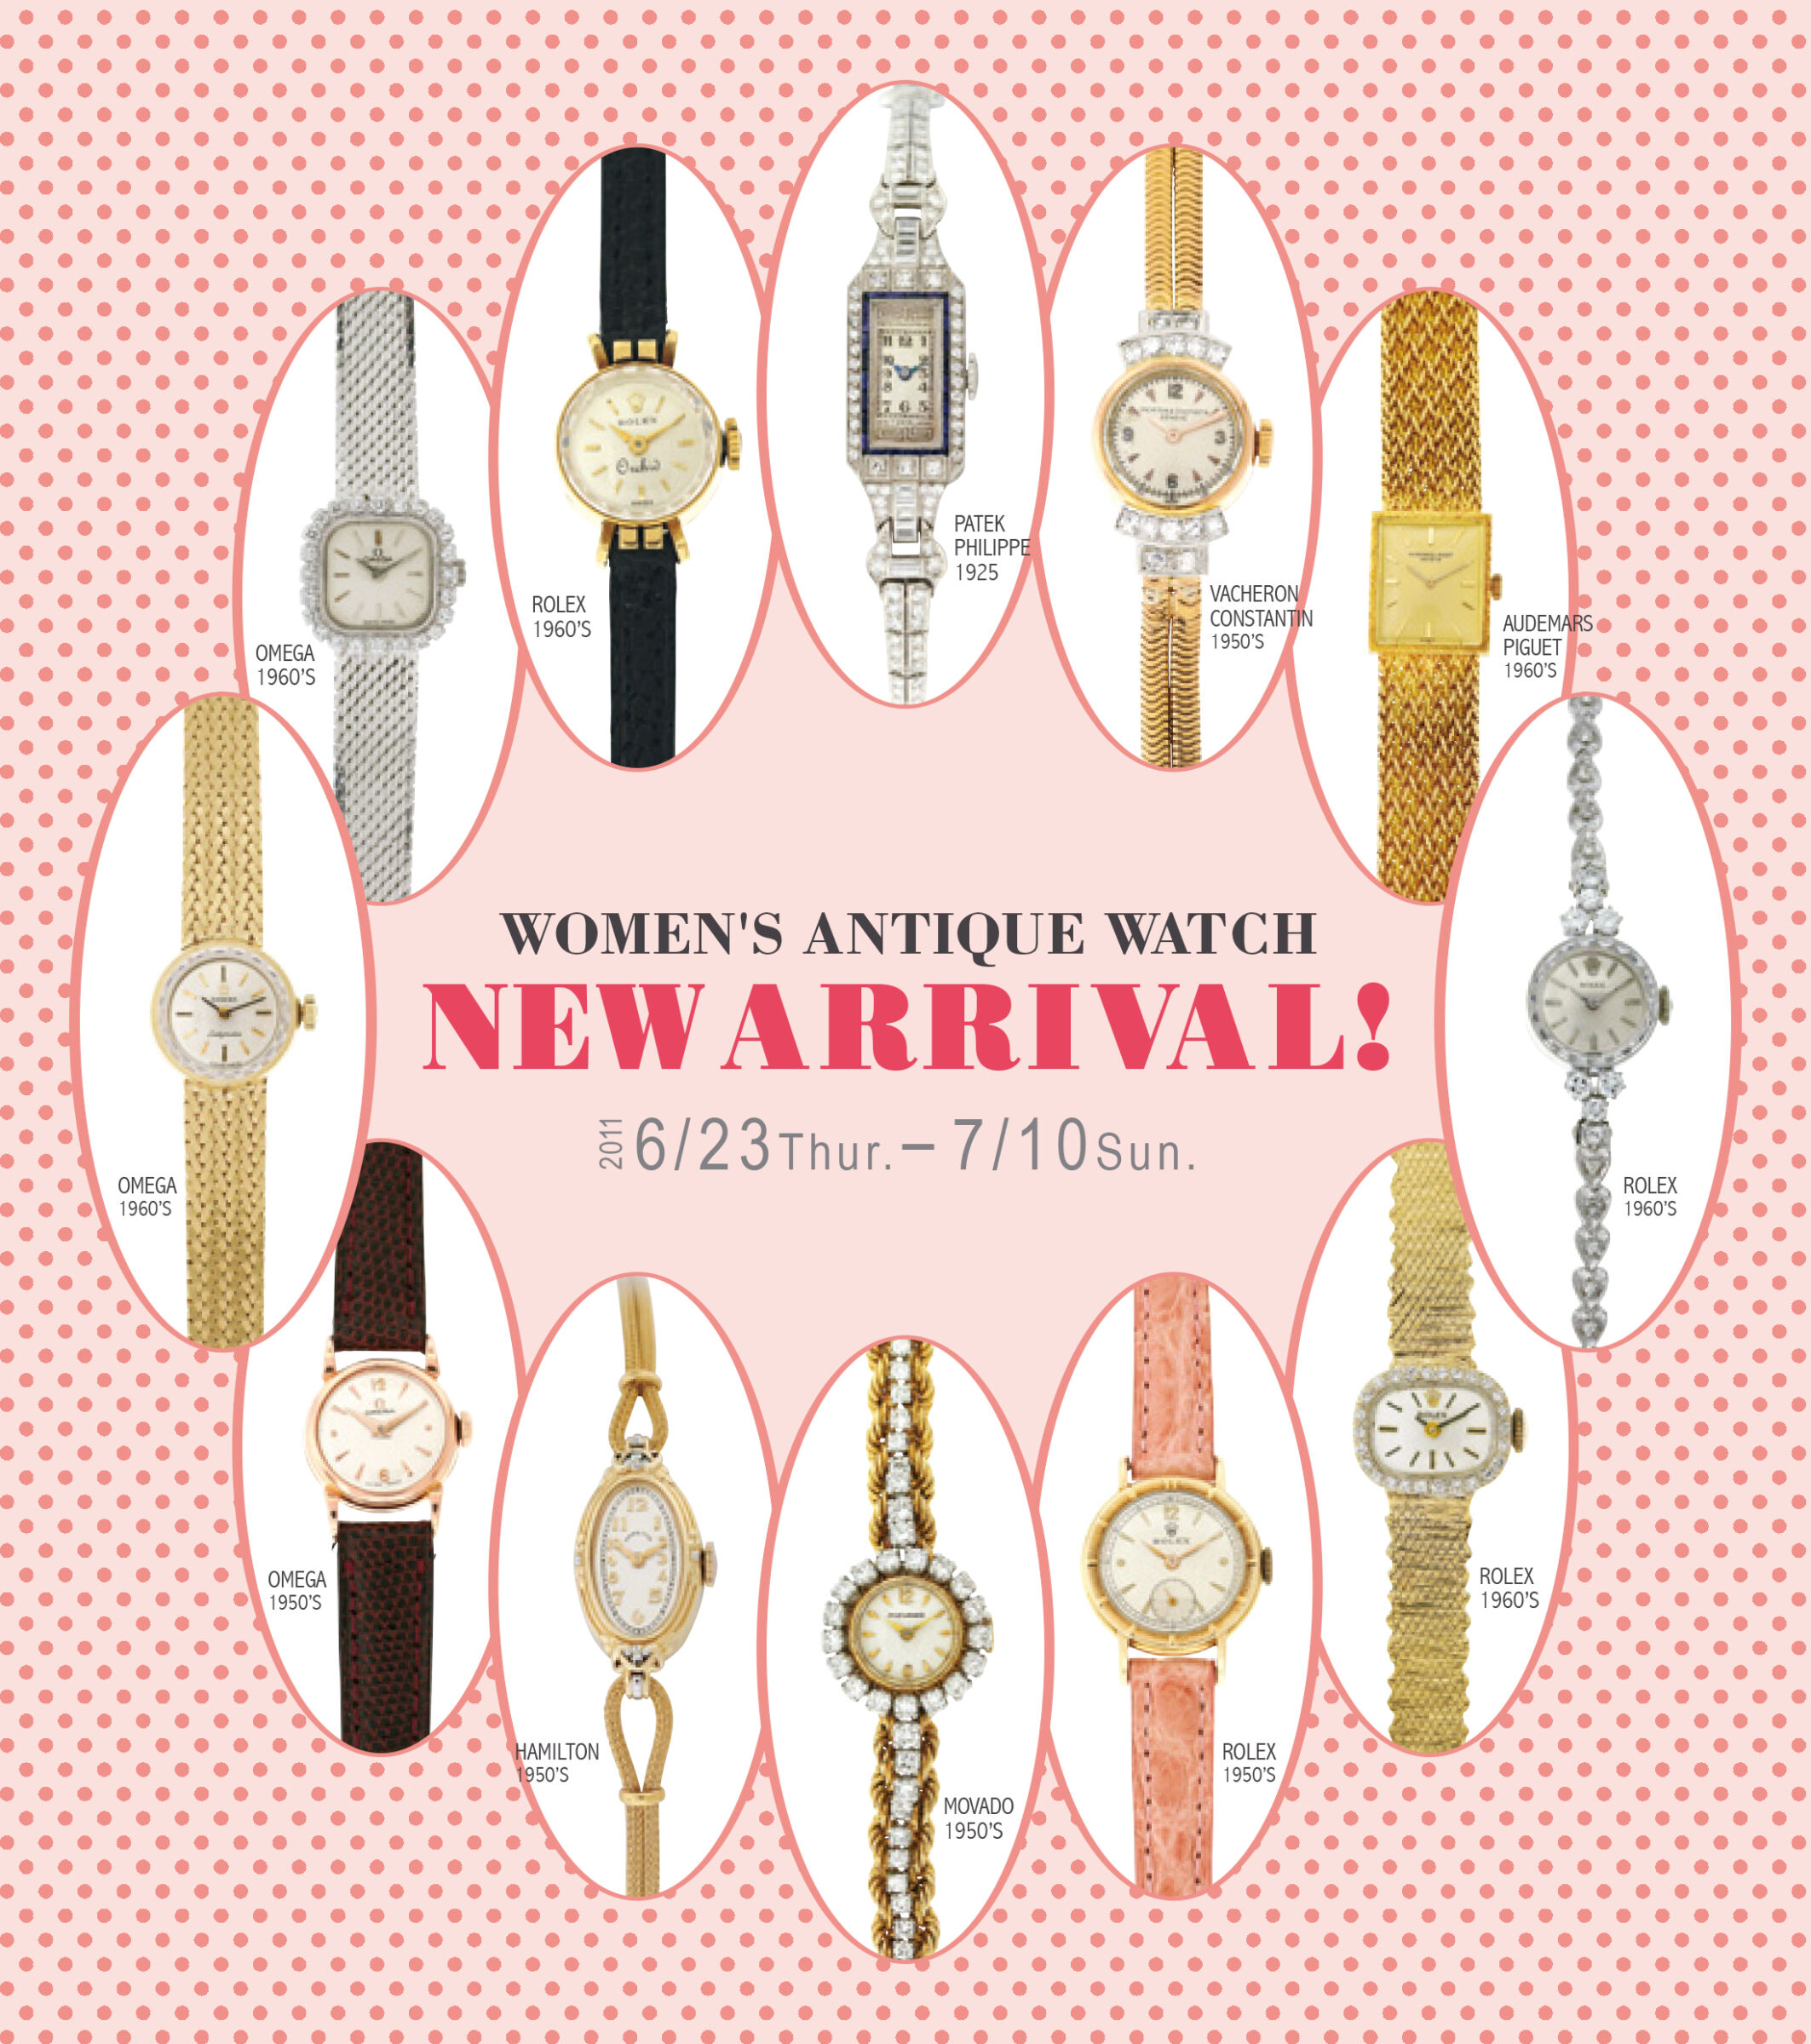 SUMMER 2011 BARNEYS NEW YORK ANTIQUE WATCH COLLECTION & SALE